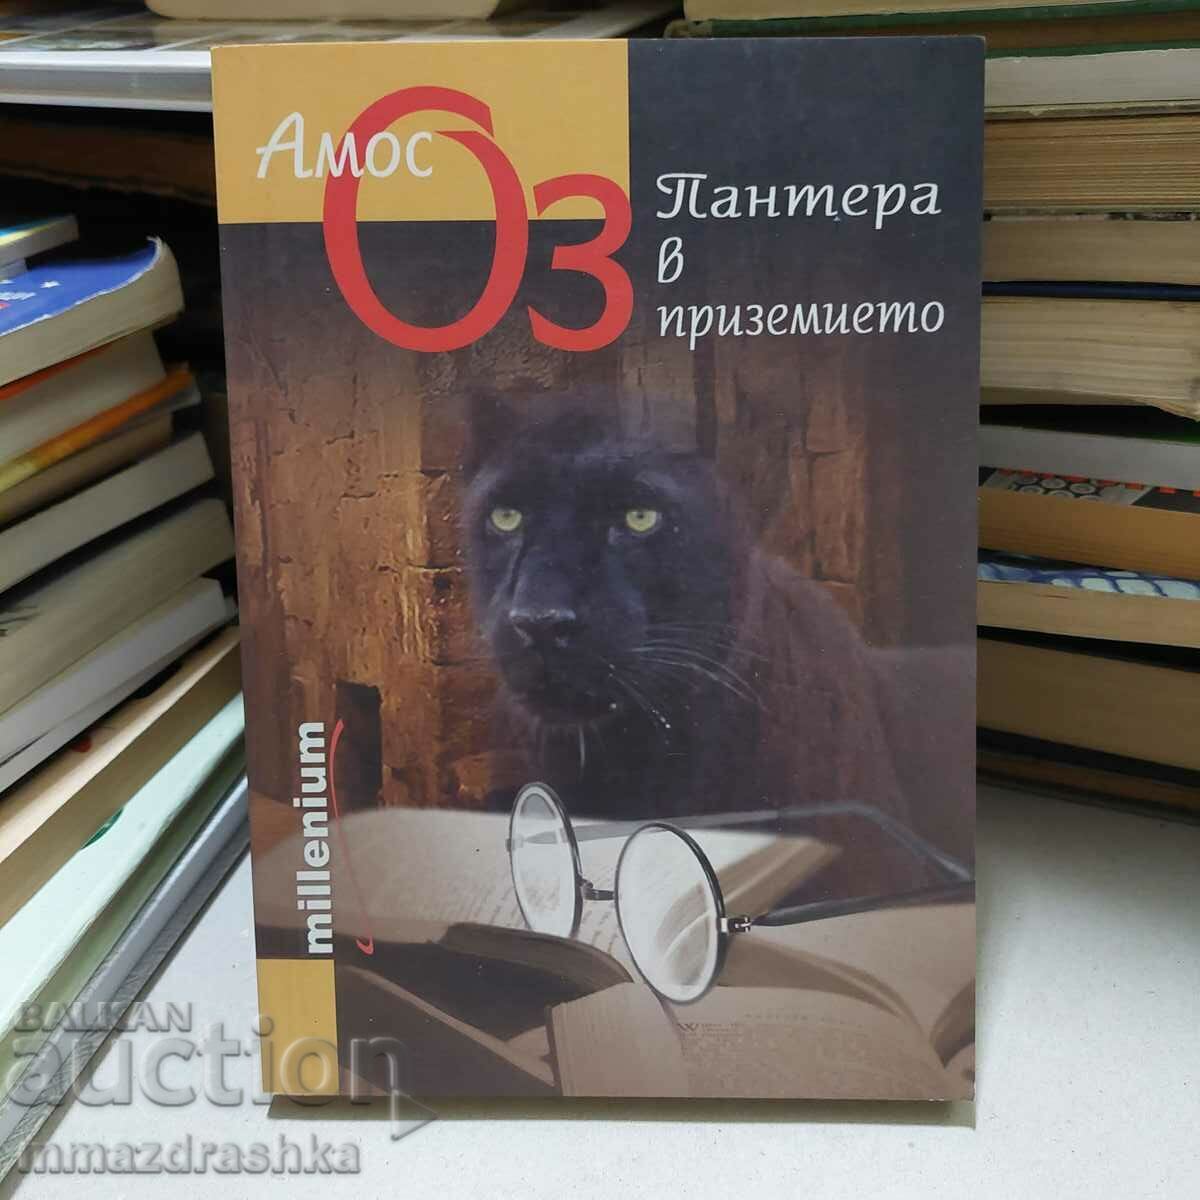 Panther in the ground floor, Amos Oz